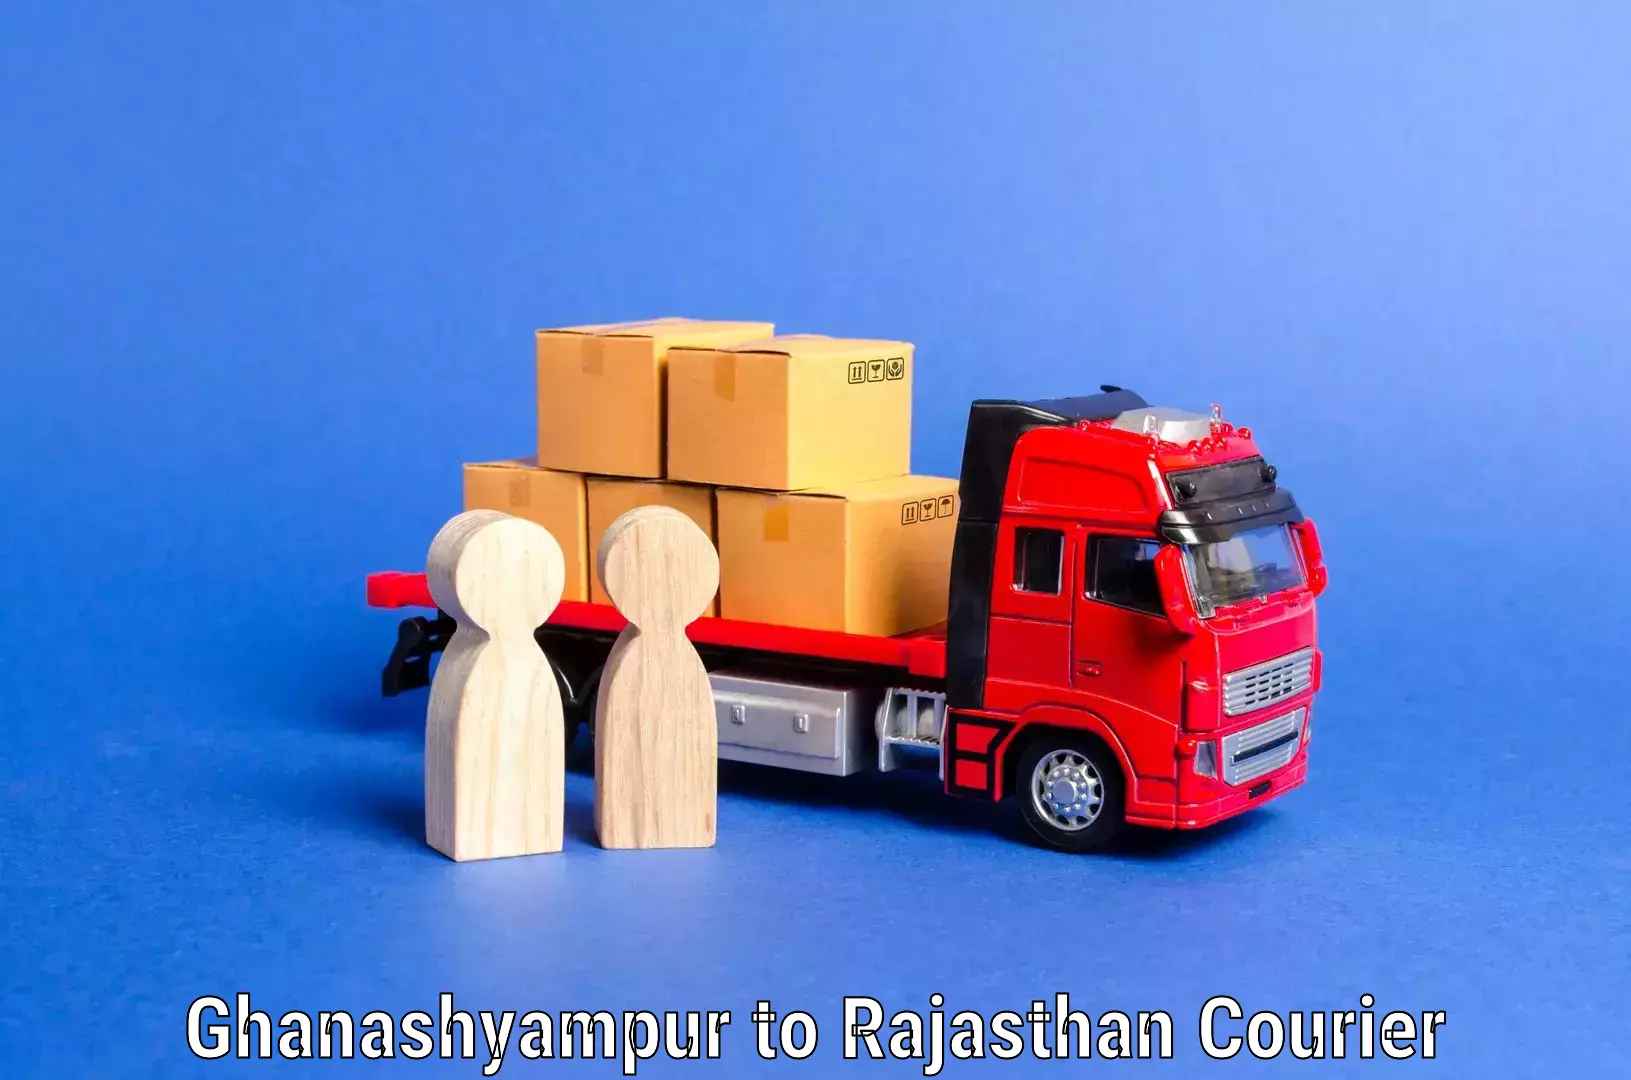 Household transport experts Ghanashyampur to Rajasthan